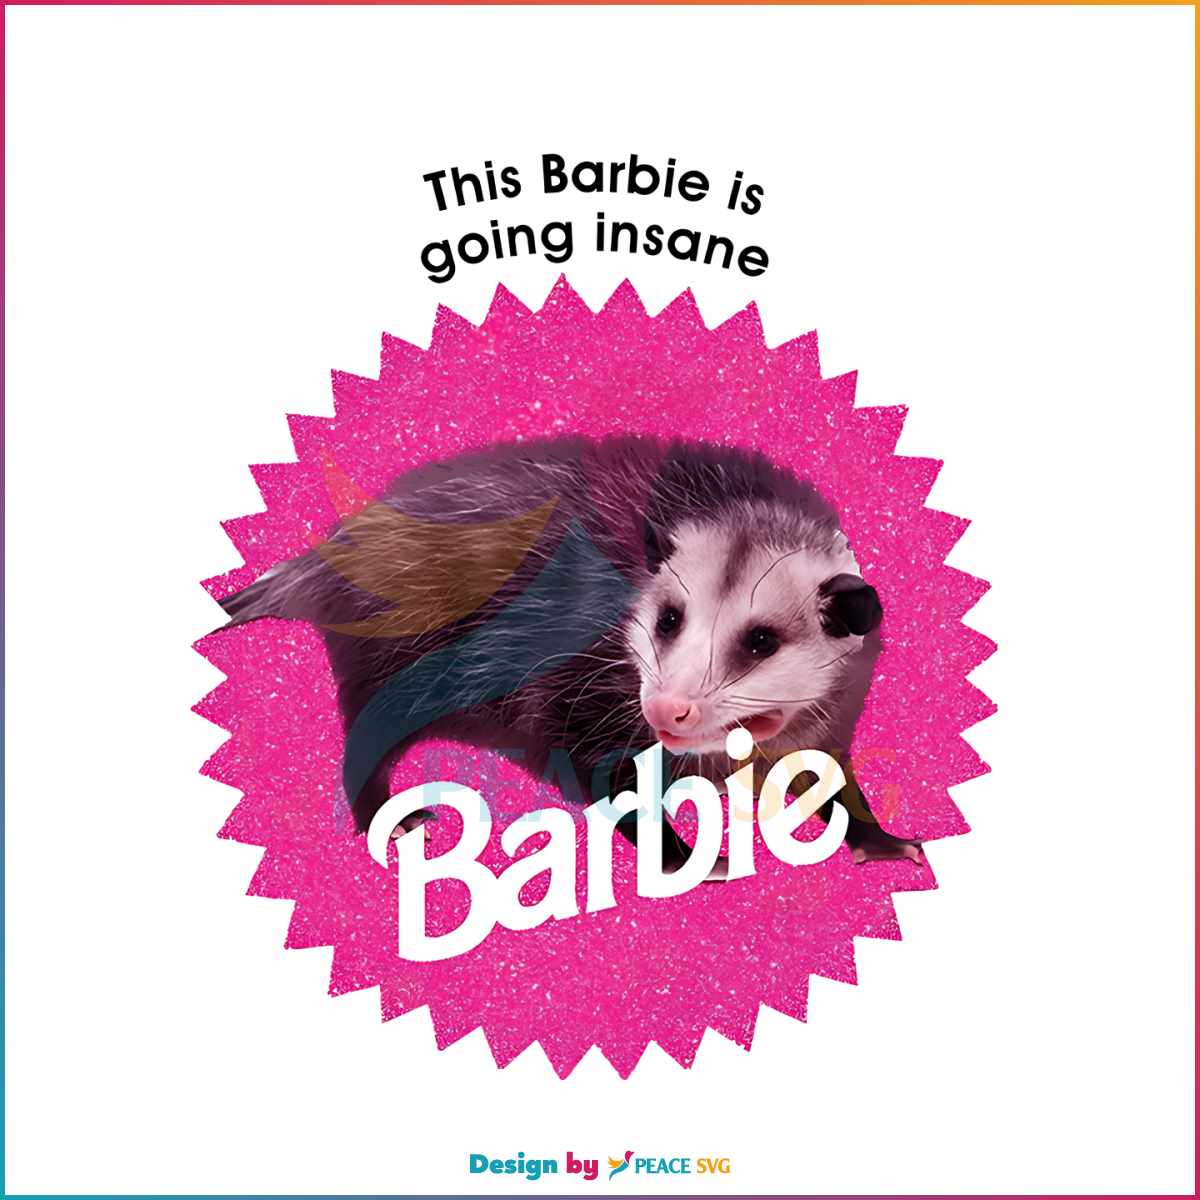 barbie-possum-funny-png-barbie-movie-png-silhouette-file